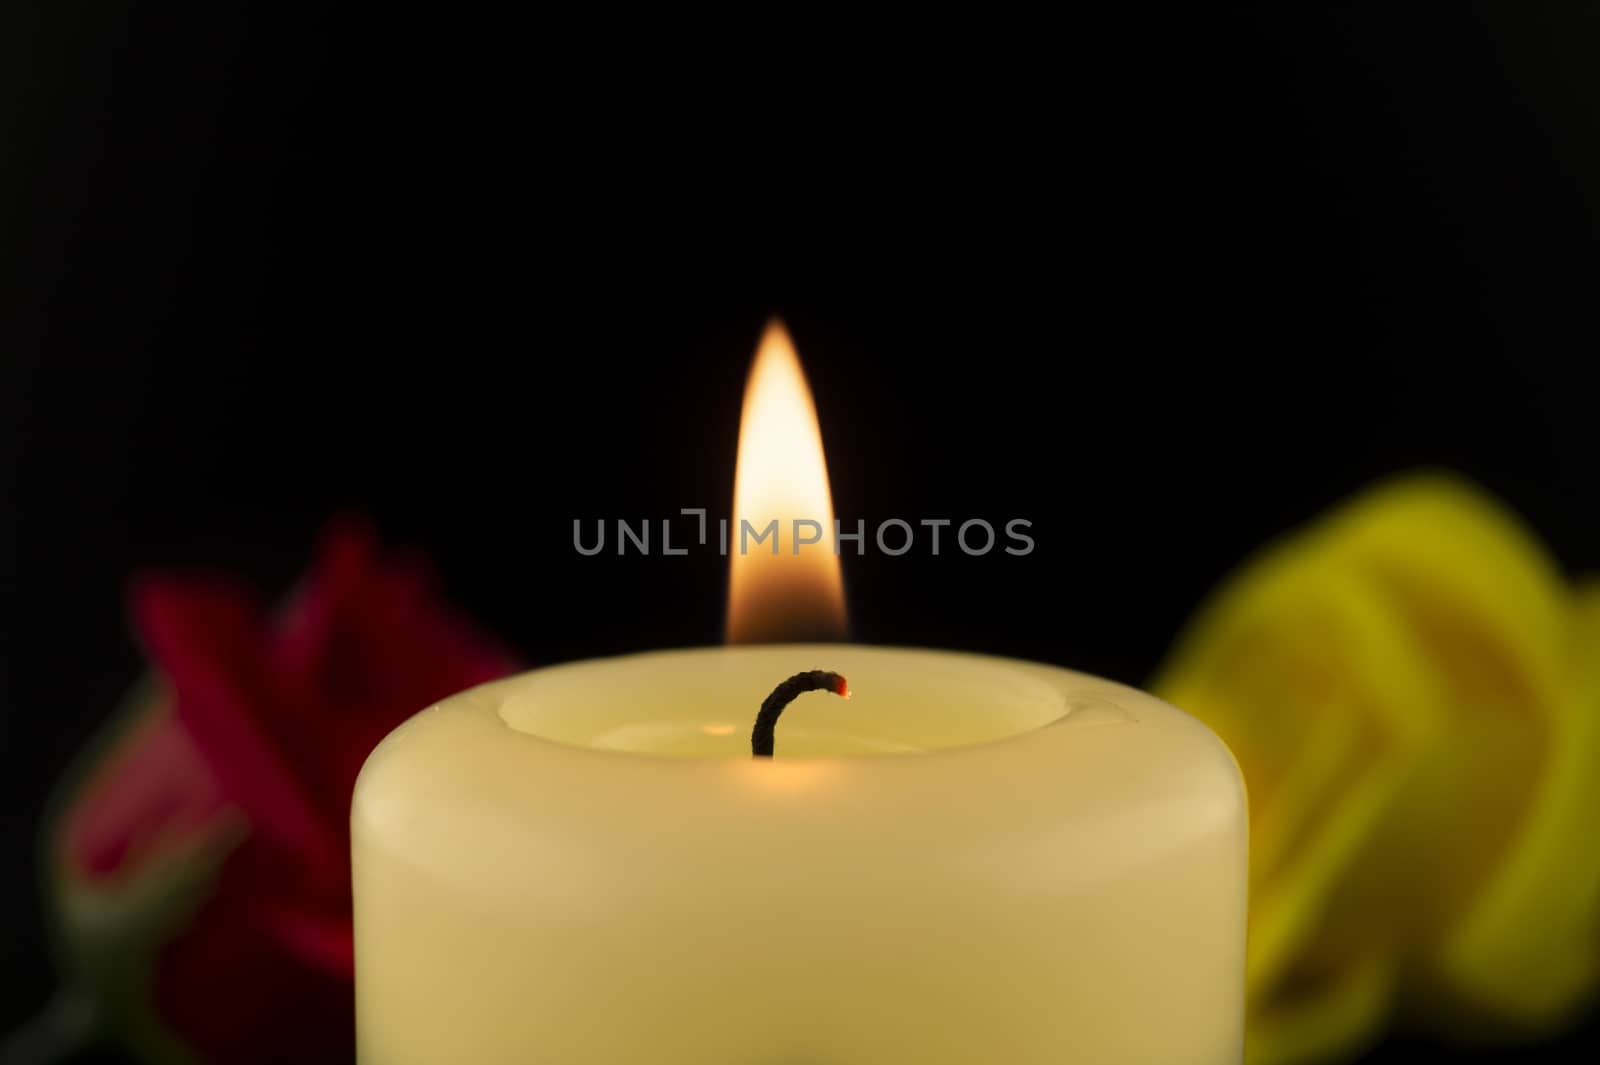 Single burning yellow candle next to red and yellow roses against dark background